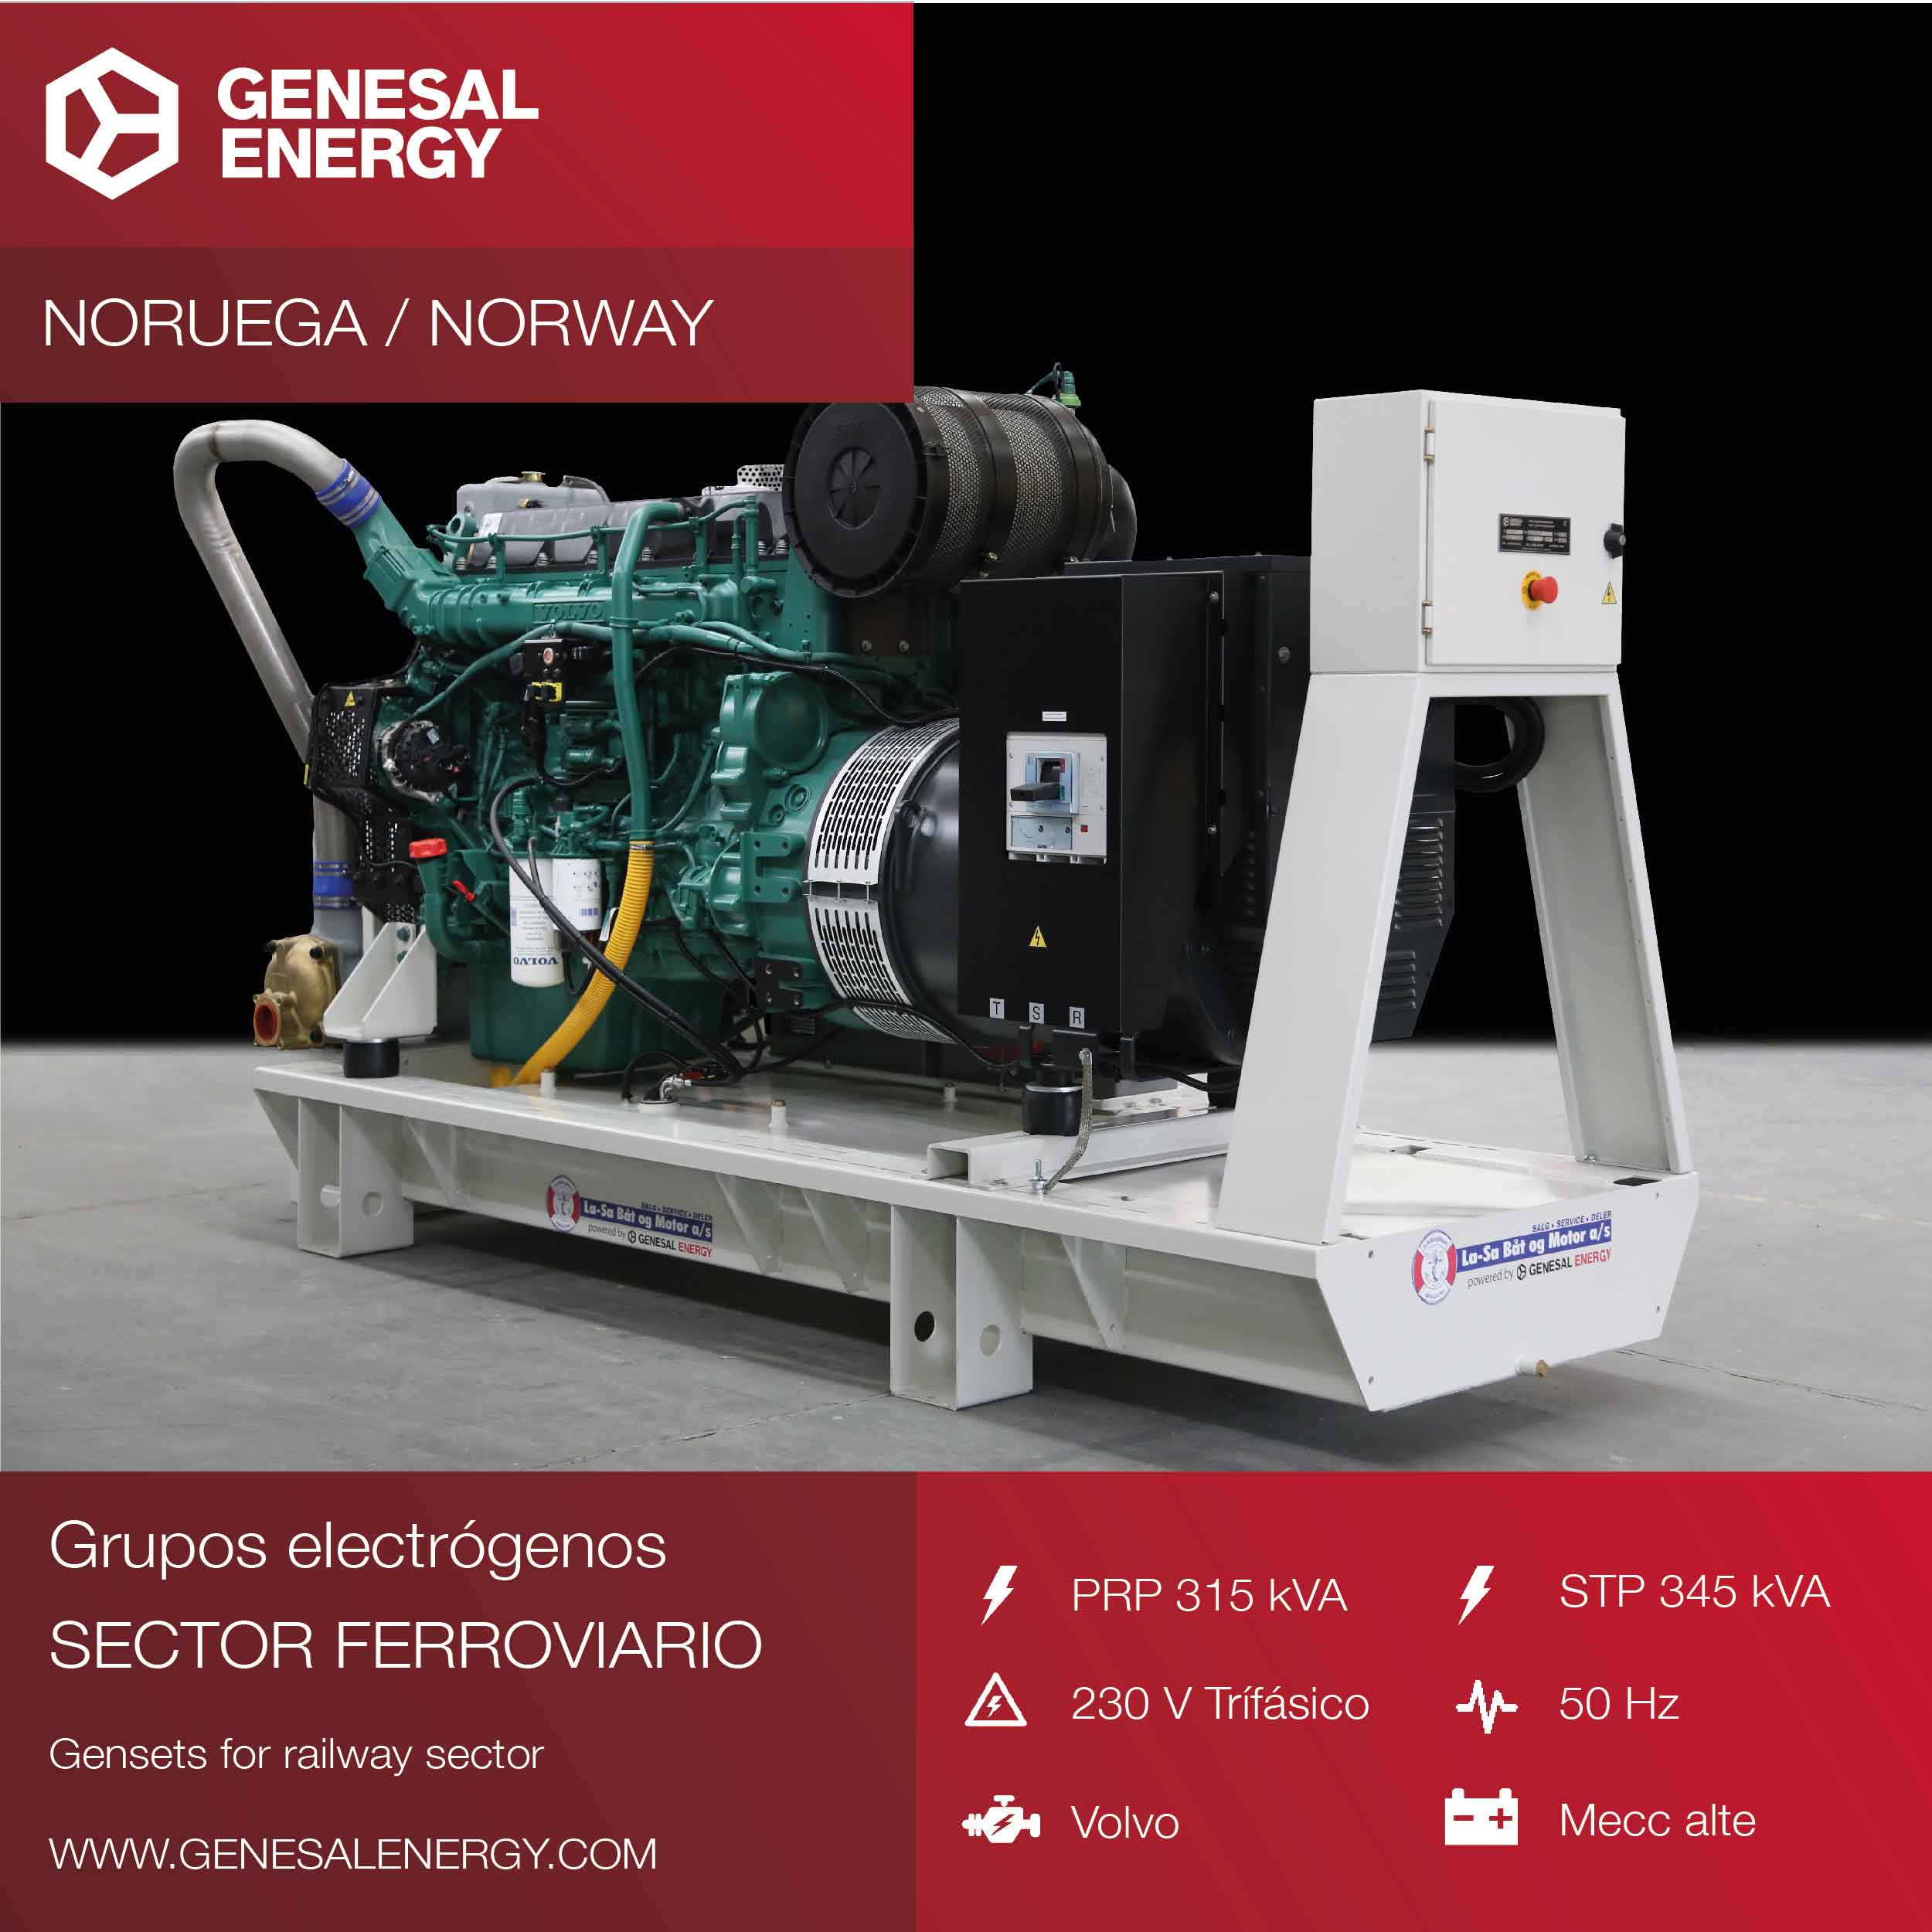 Emergency gensets for the railway sector